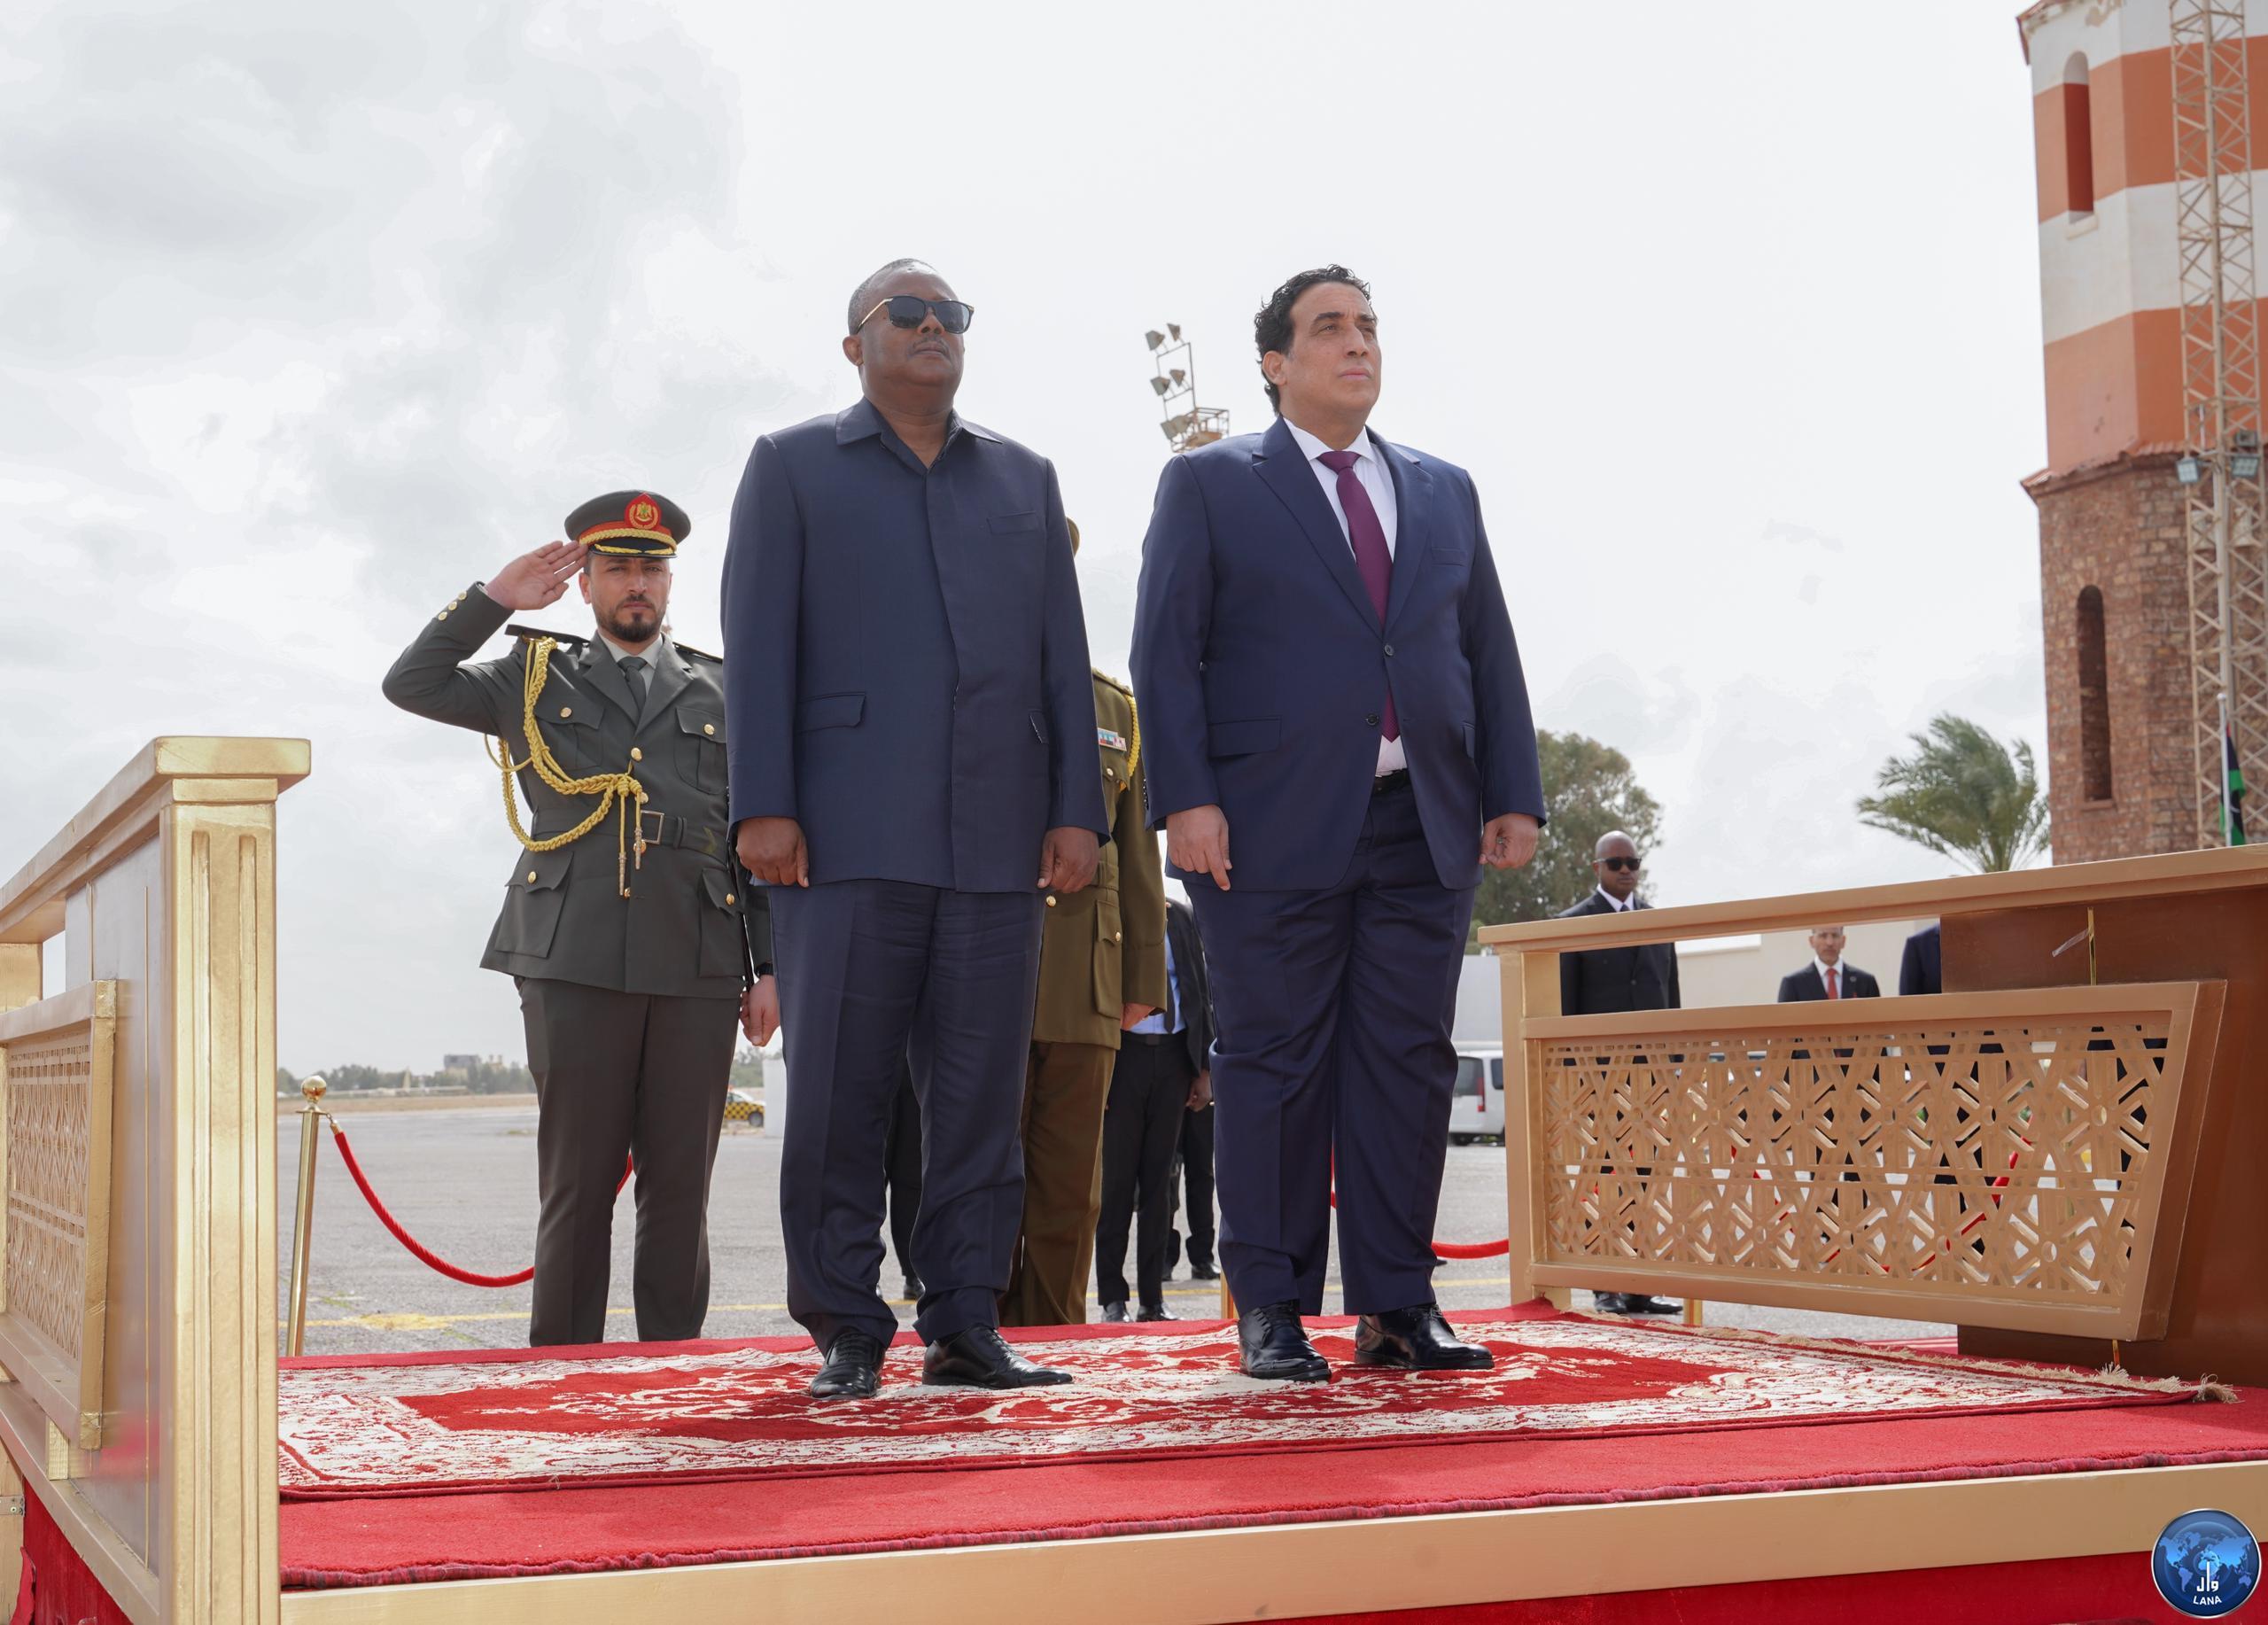 The President of the Republic of Guinea-Bissau arrives in Tripoli on an official visit to Libya.